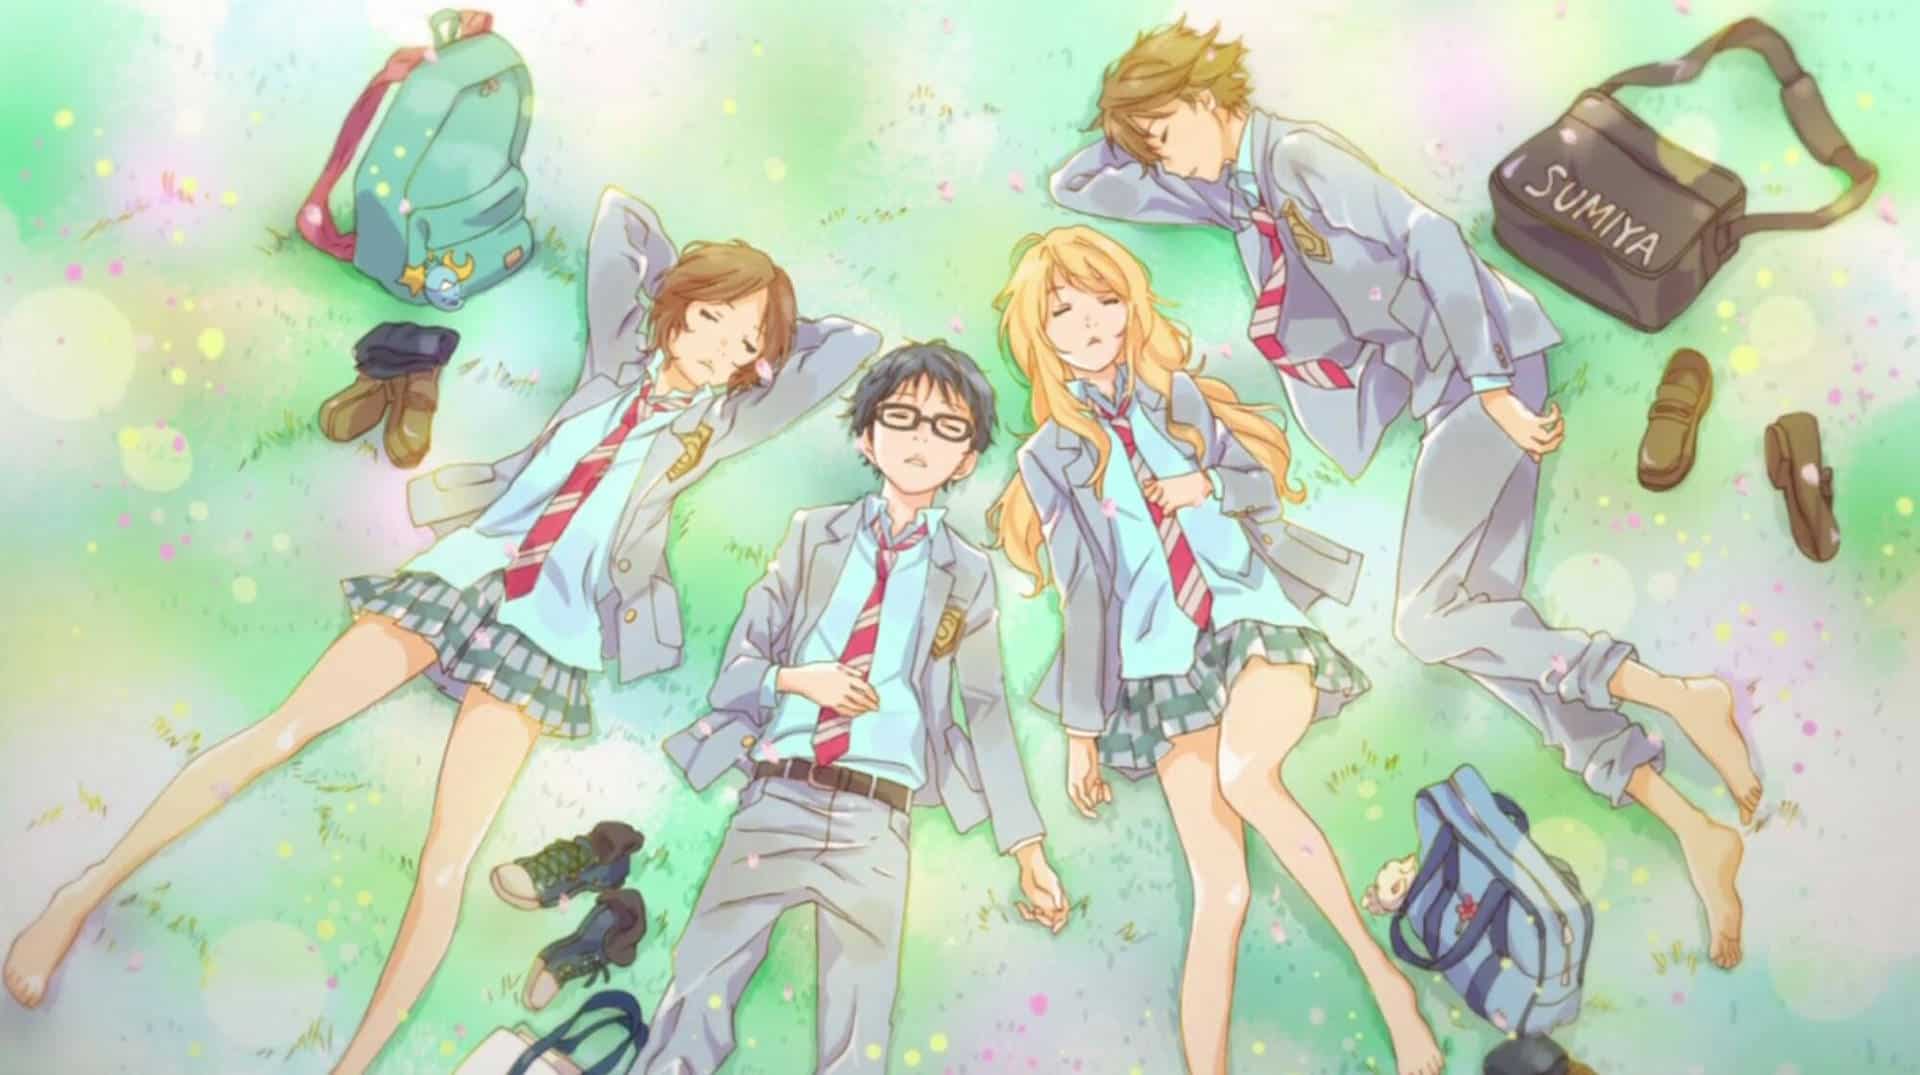 Your Lie In April characters